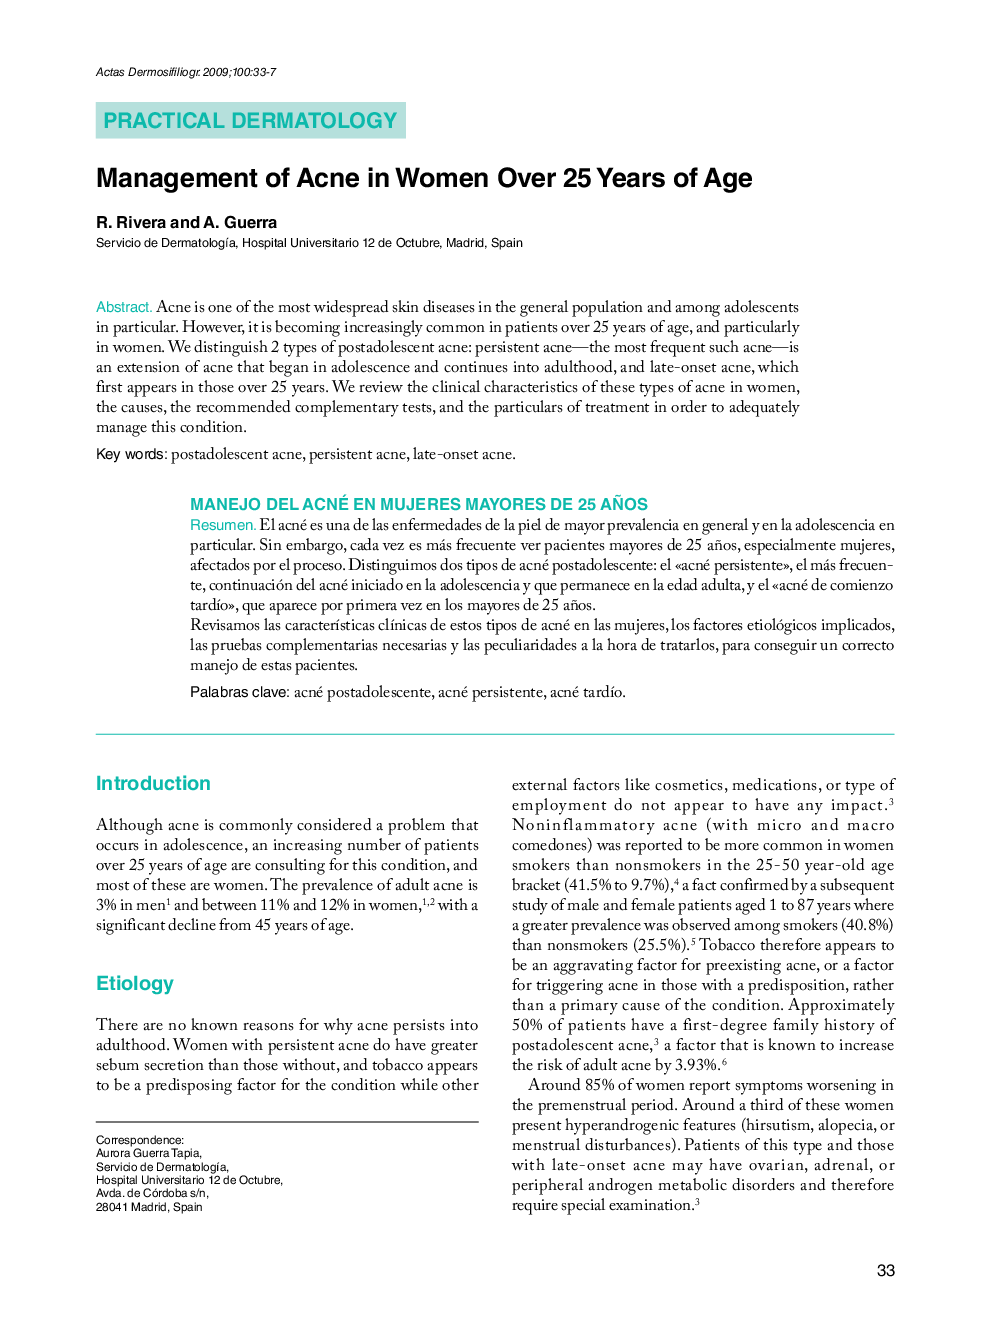 Management of Acne in Women Over 25 Years of Age